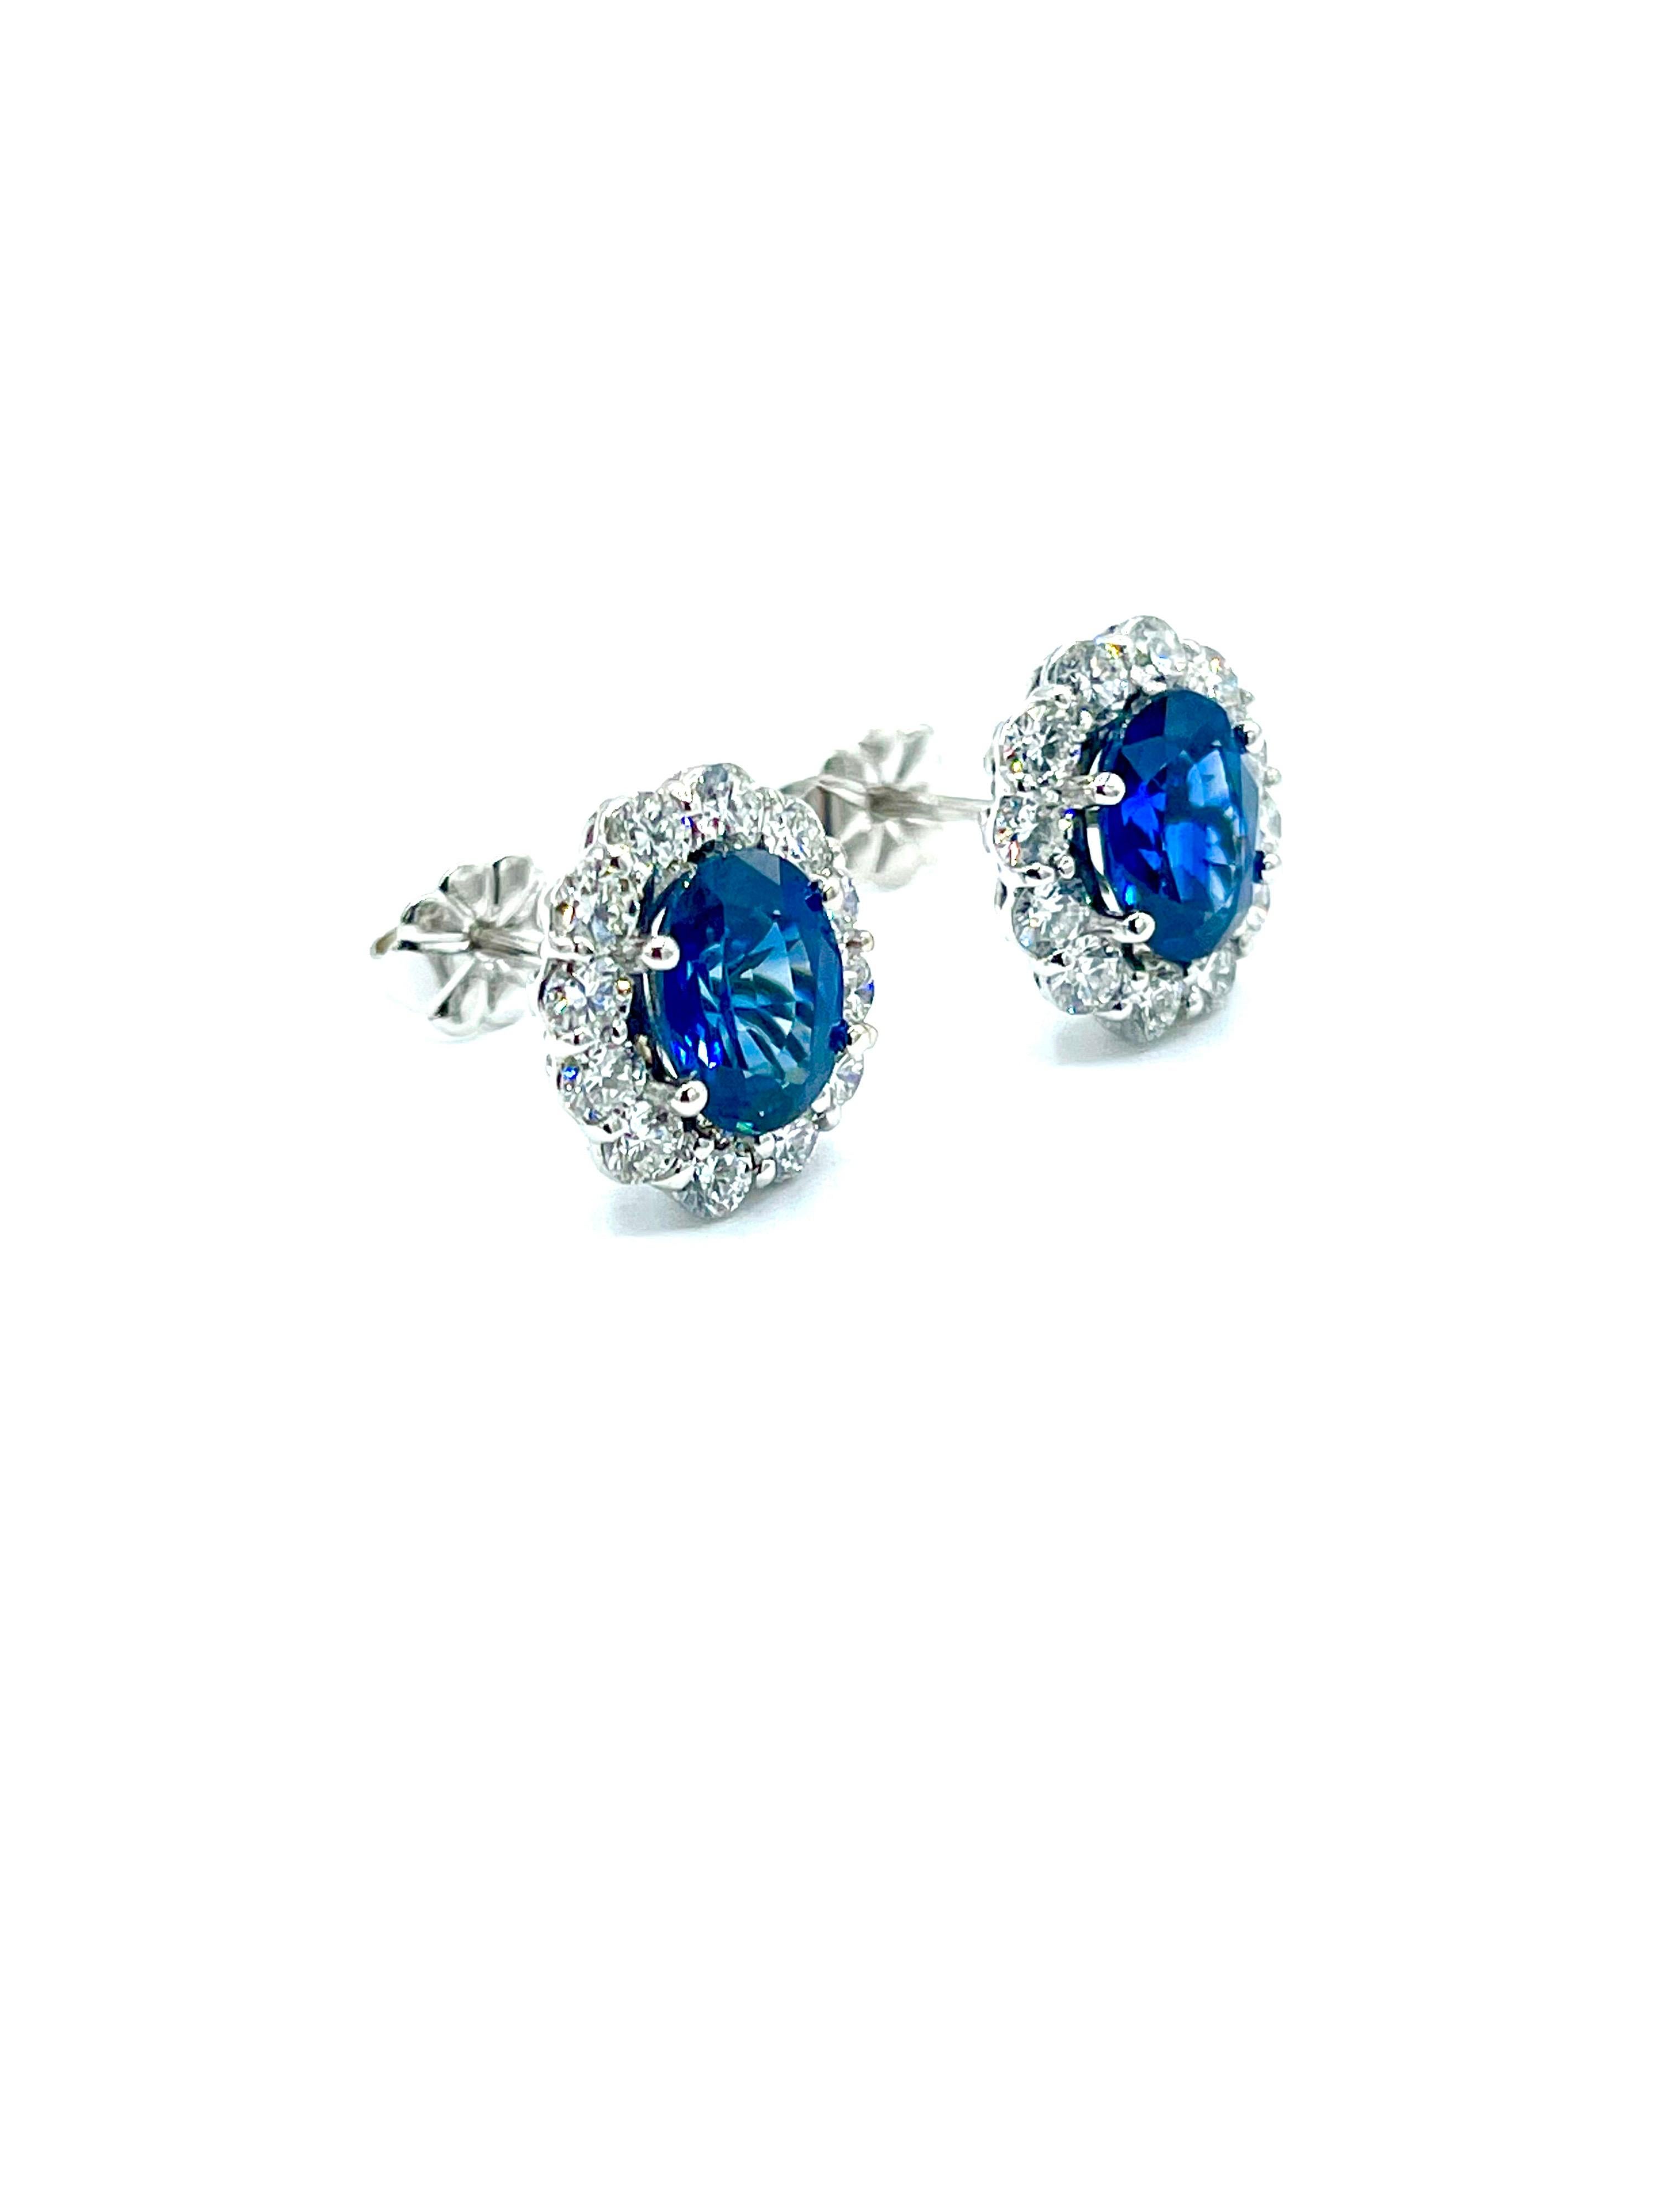 Oval Cut 3.16 Carat Oval Sapphires and Round Brilliant Diamond White Gold Stud Earrings For Sale